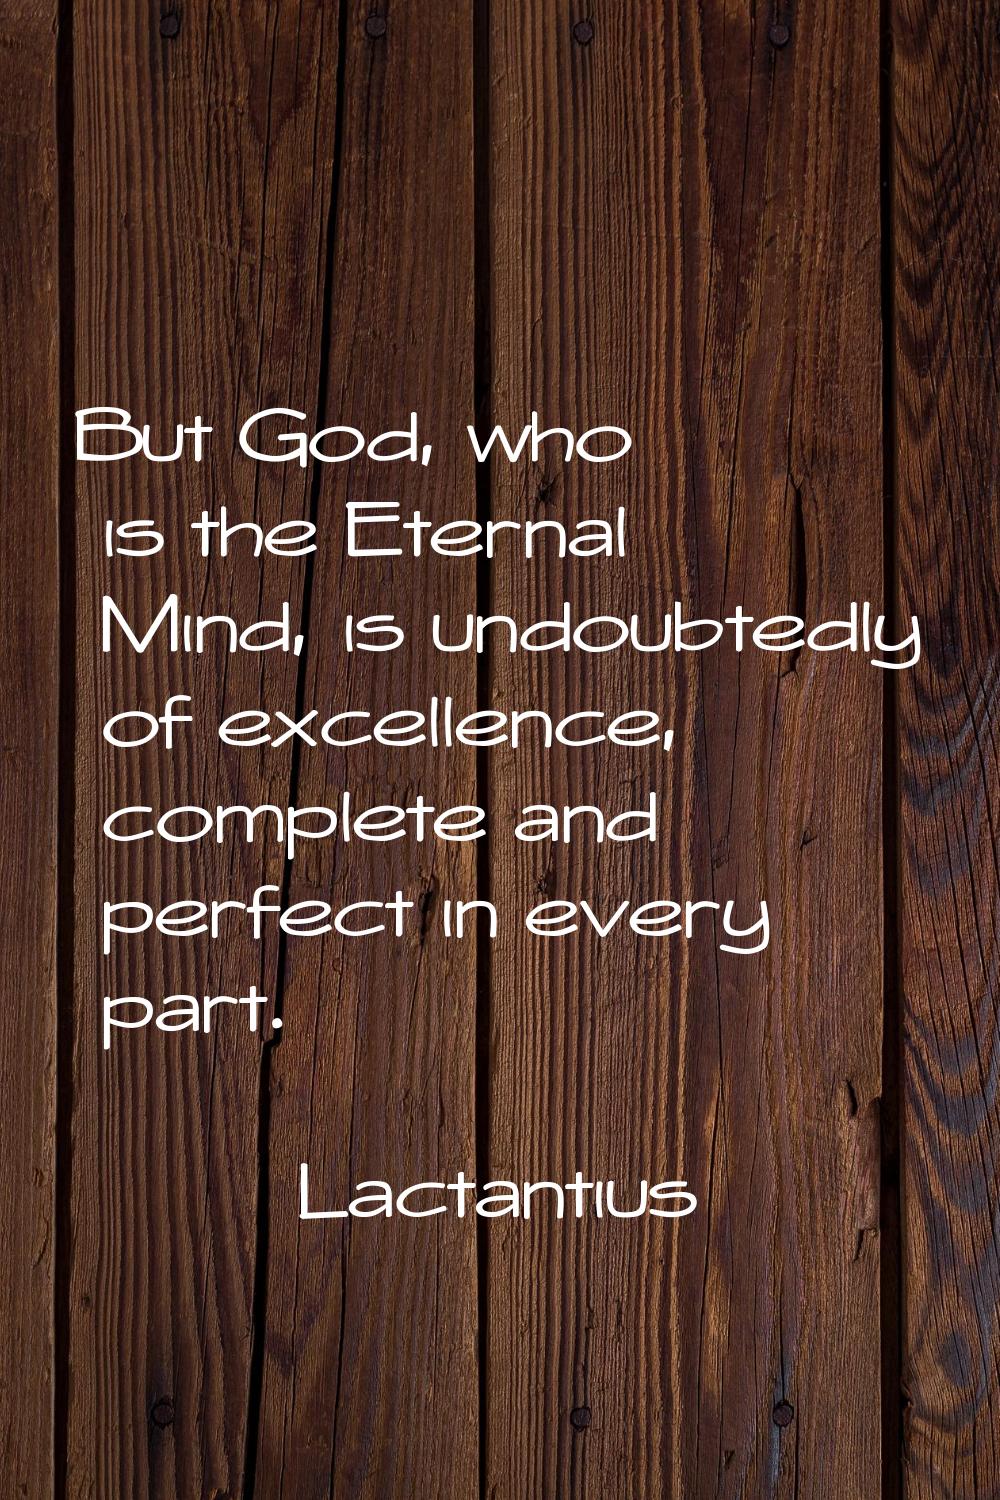 But God, who is the Eternal Mind, is undoubtedly of excellence, complete and perfect in every part.